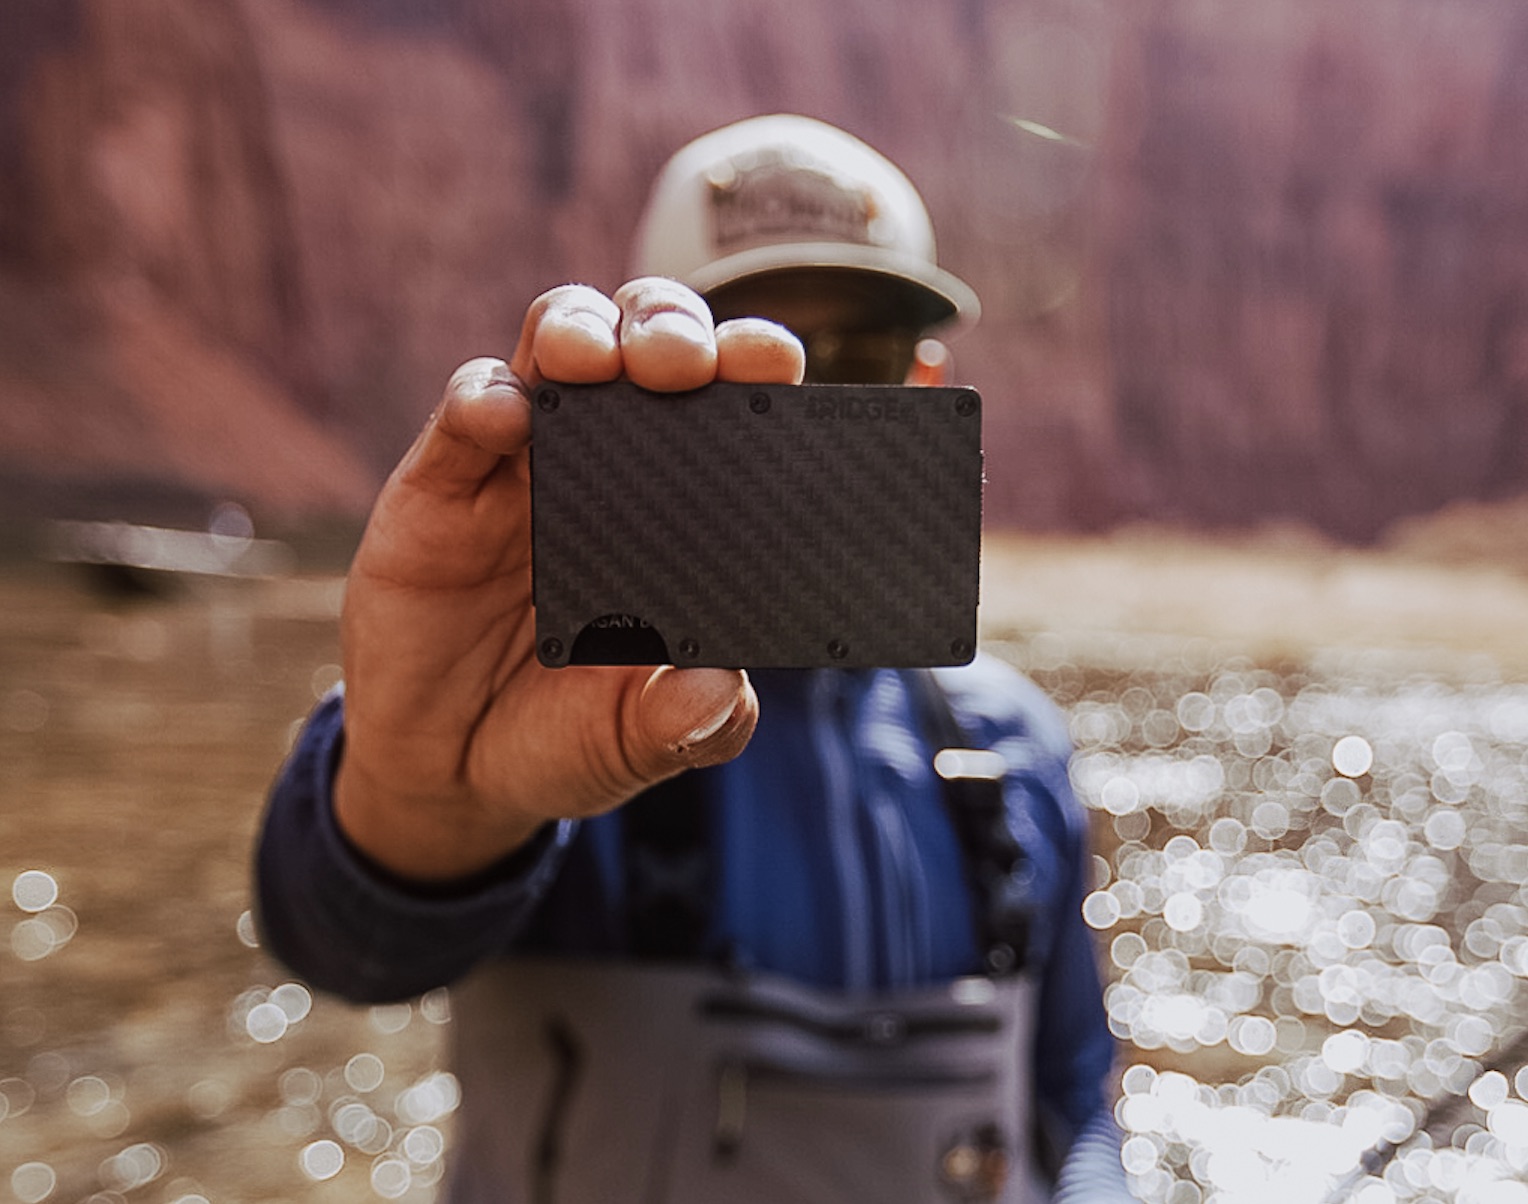 Ridge Wallet Review: One Of The Best Slim Wallets For Everyday Carry